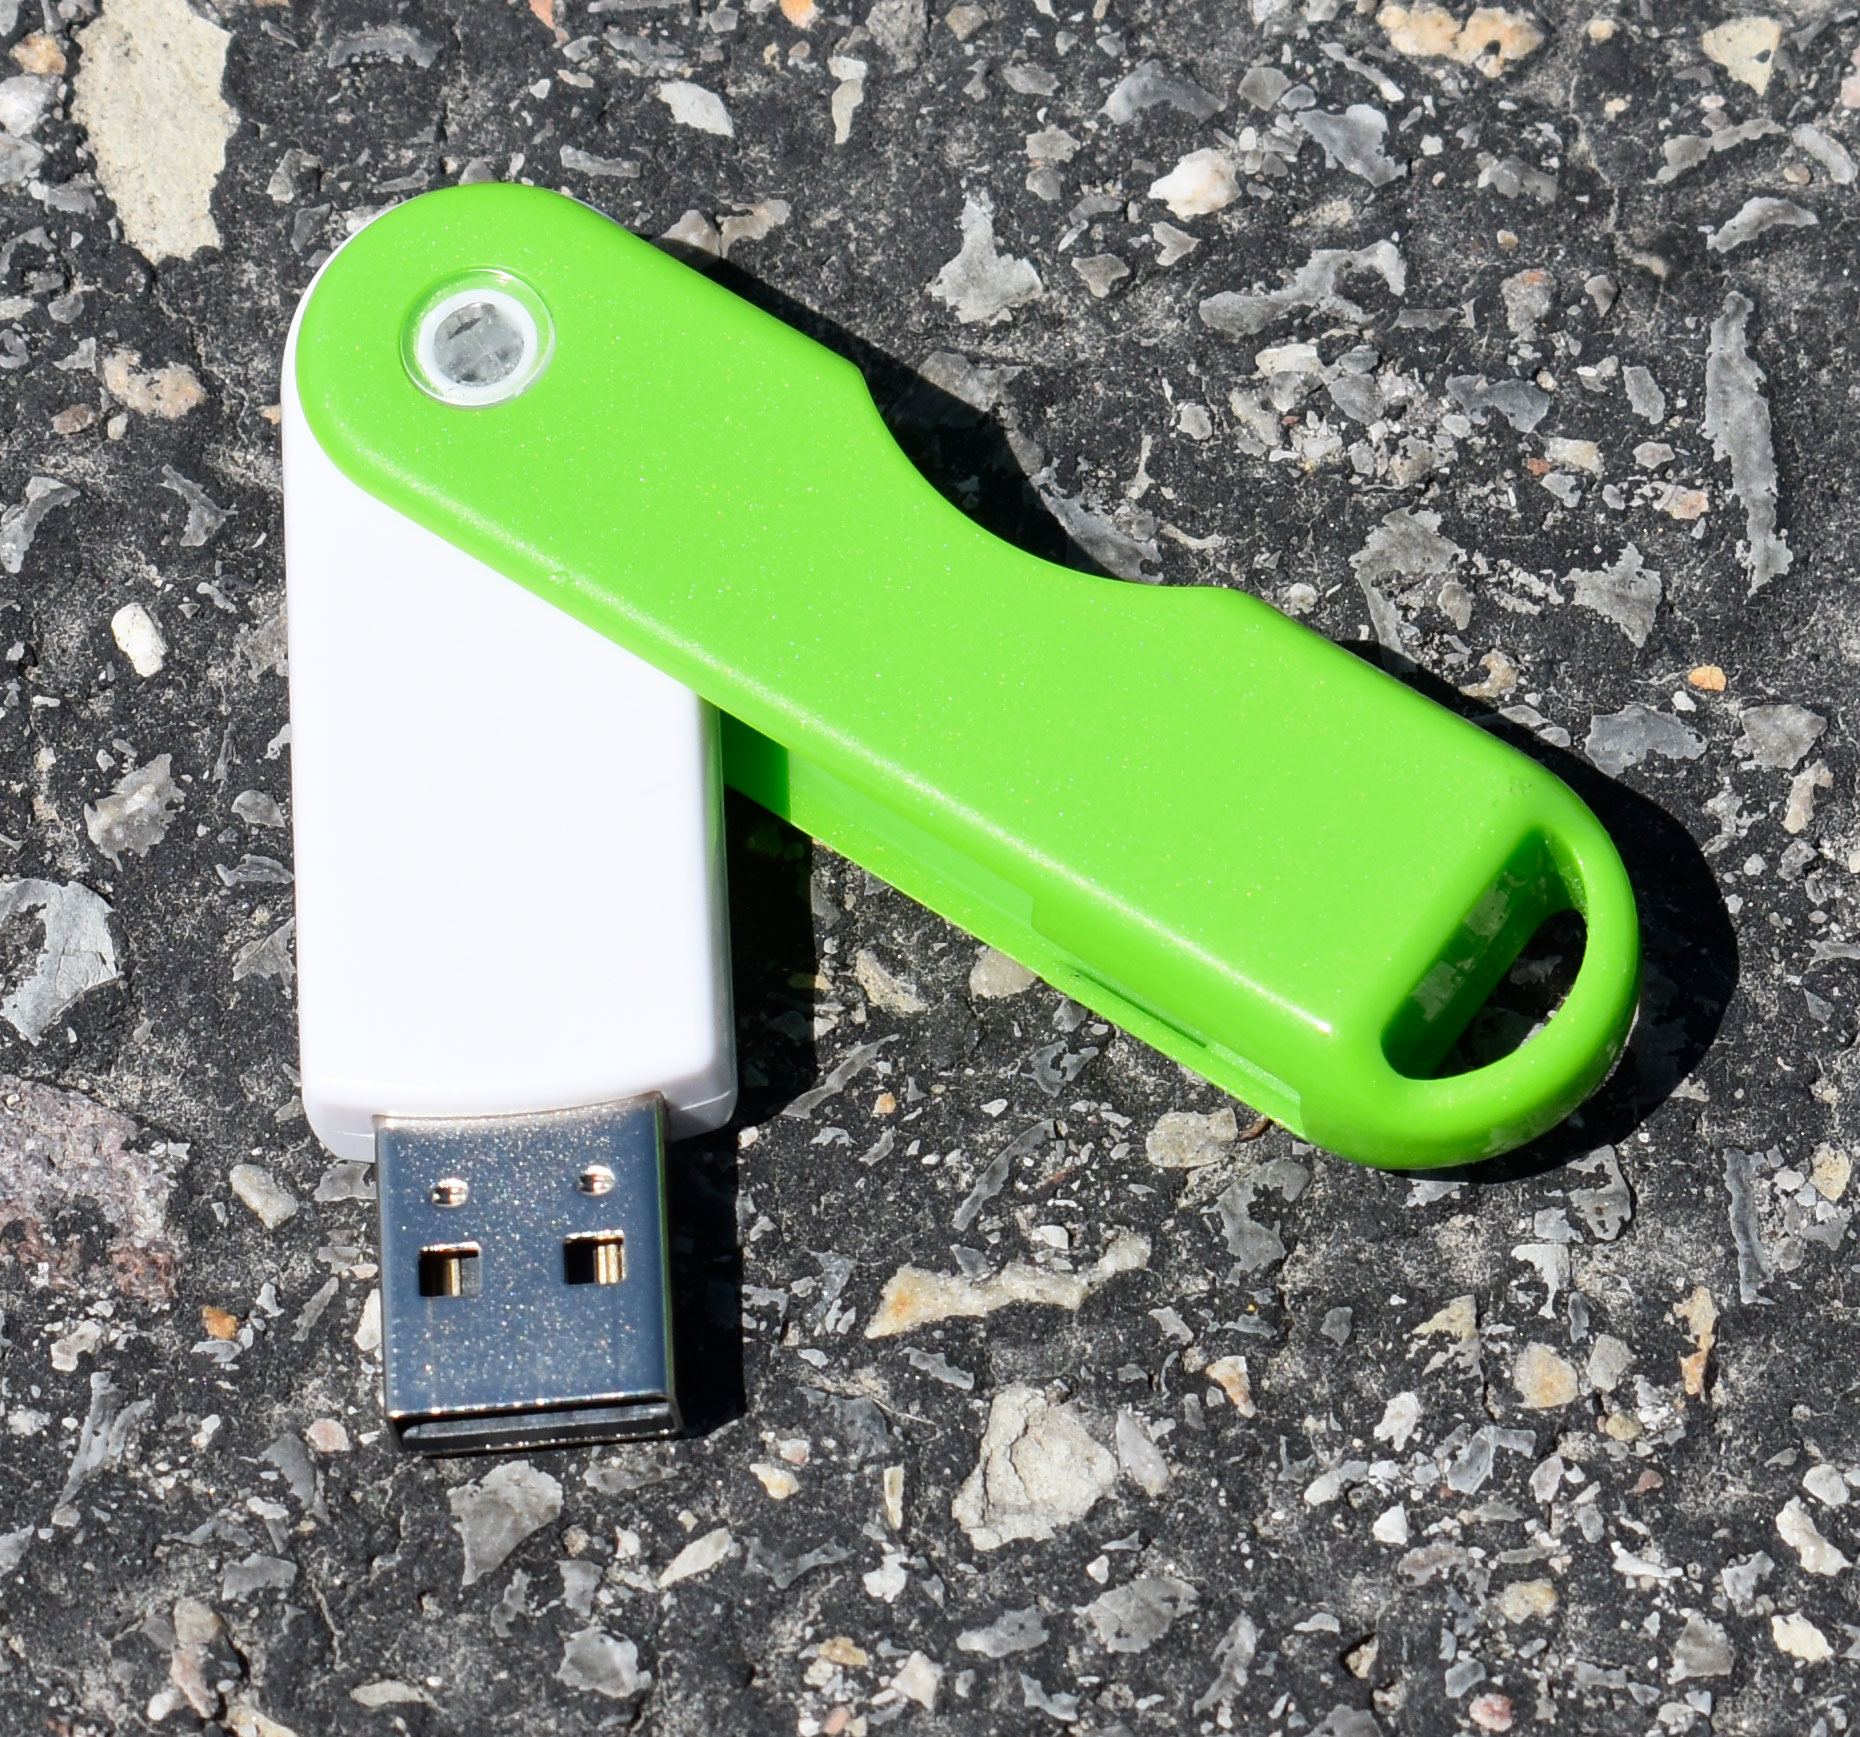 USB Drive found in the parking lot